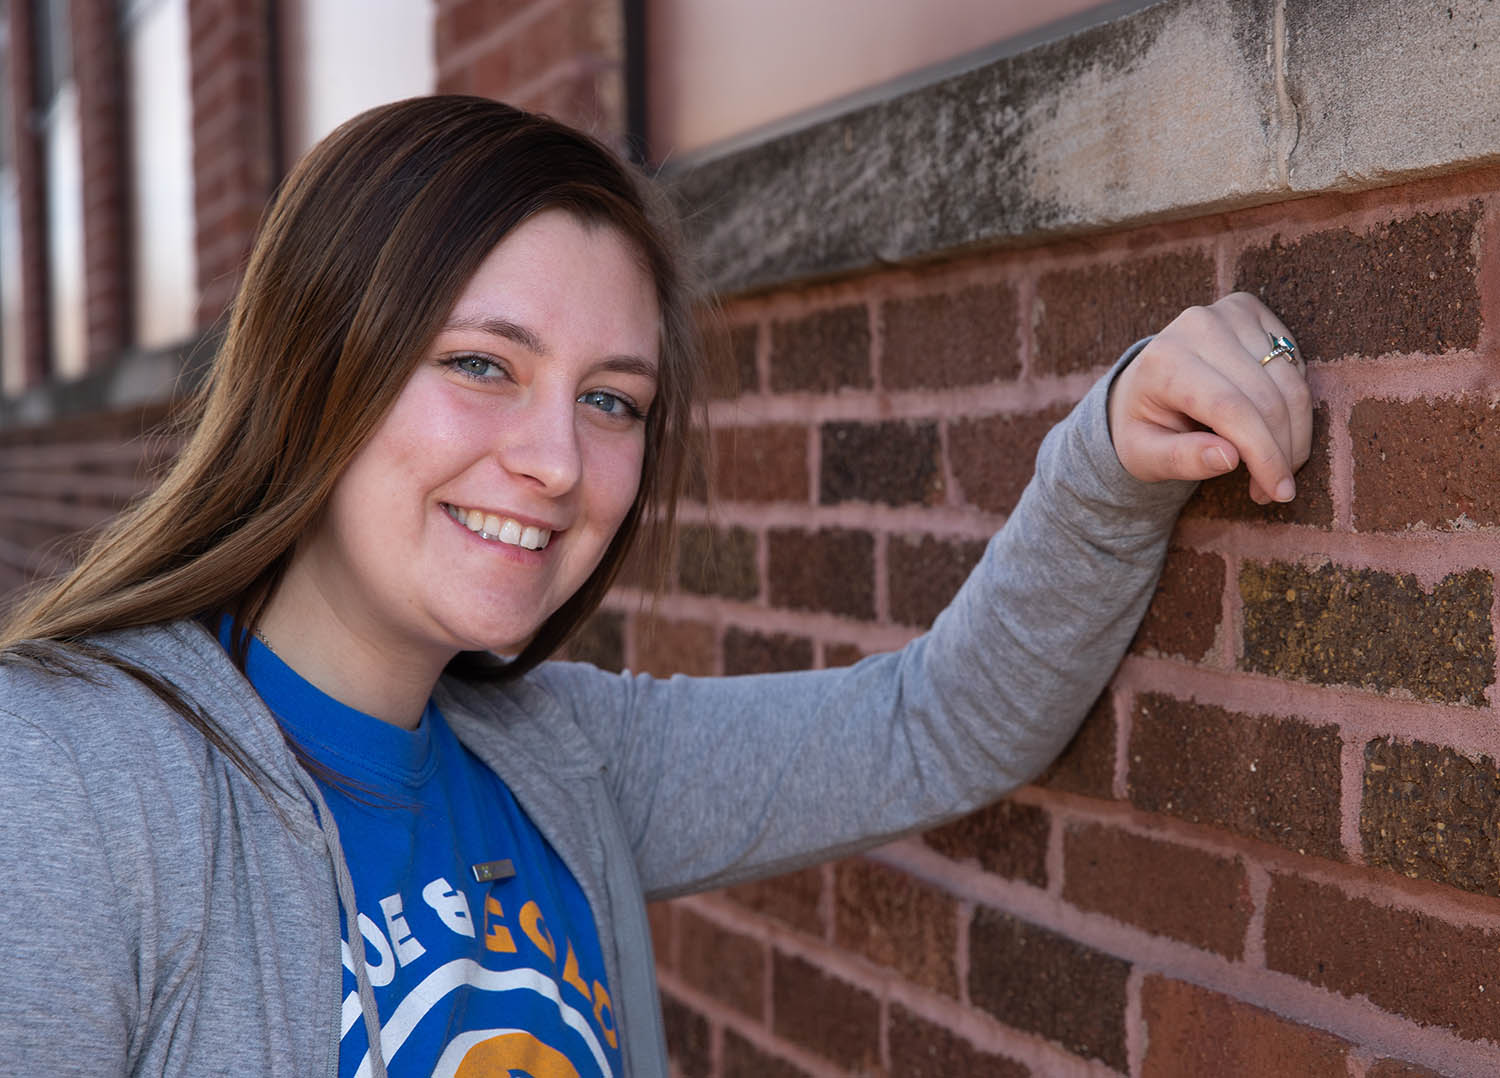 UNK student Autumn Ickler, a junior from Plainview, recently donated bone marrow to a 54-year-old woman battling acute myeloid leukemia. “I didn’t choose to give her my bone marrow just because she has cancer,” Ickler said. “I chose to give her my bone marrow because I want her kids to have more time with their mom, so she could smile again, so she could have more time on this Earth. I want her to have her life back.” (Photo by Corbey R. Dorsey, UNK Communications)